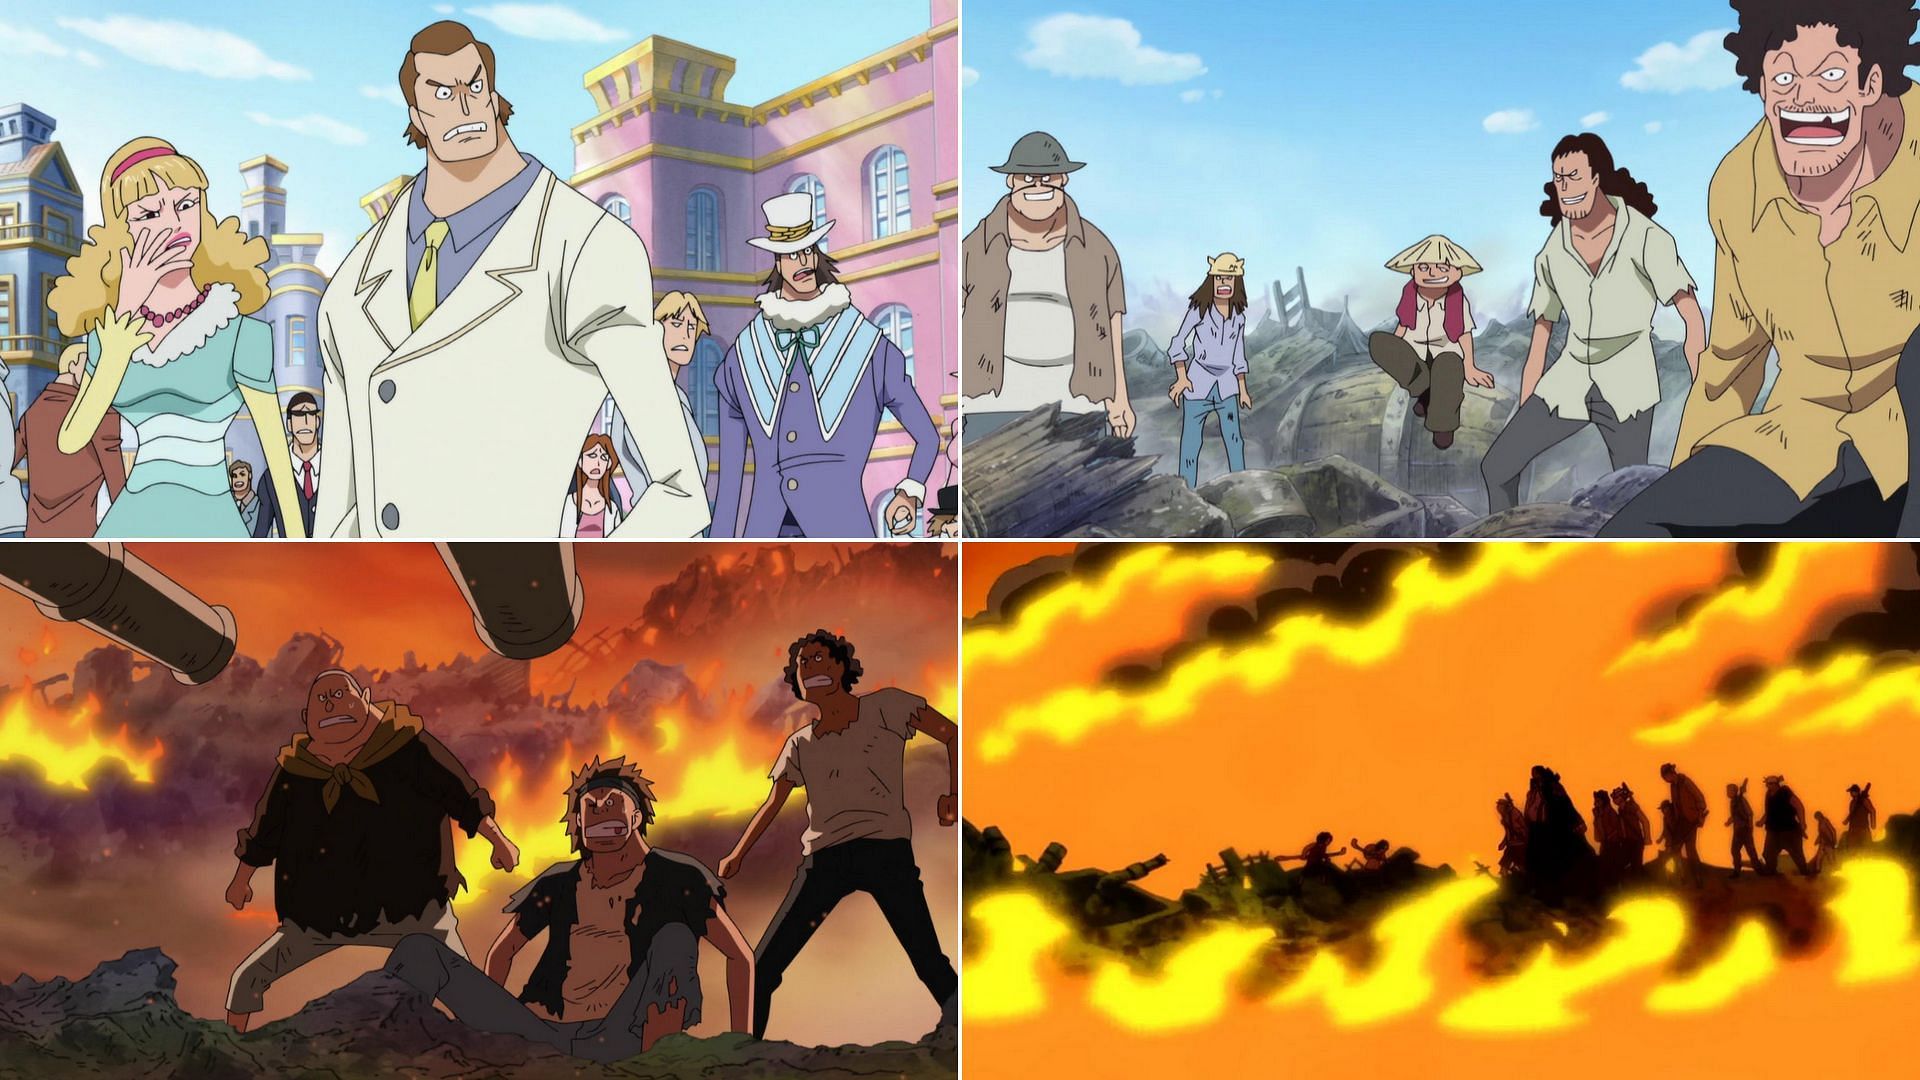 A history of inequality and maliciousness (Image via Toei Animation, One Piece)